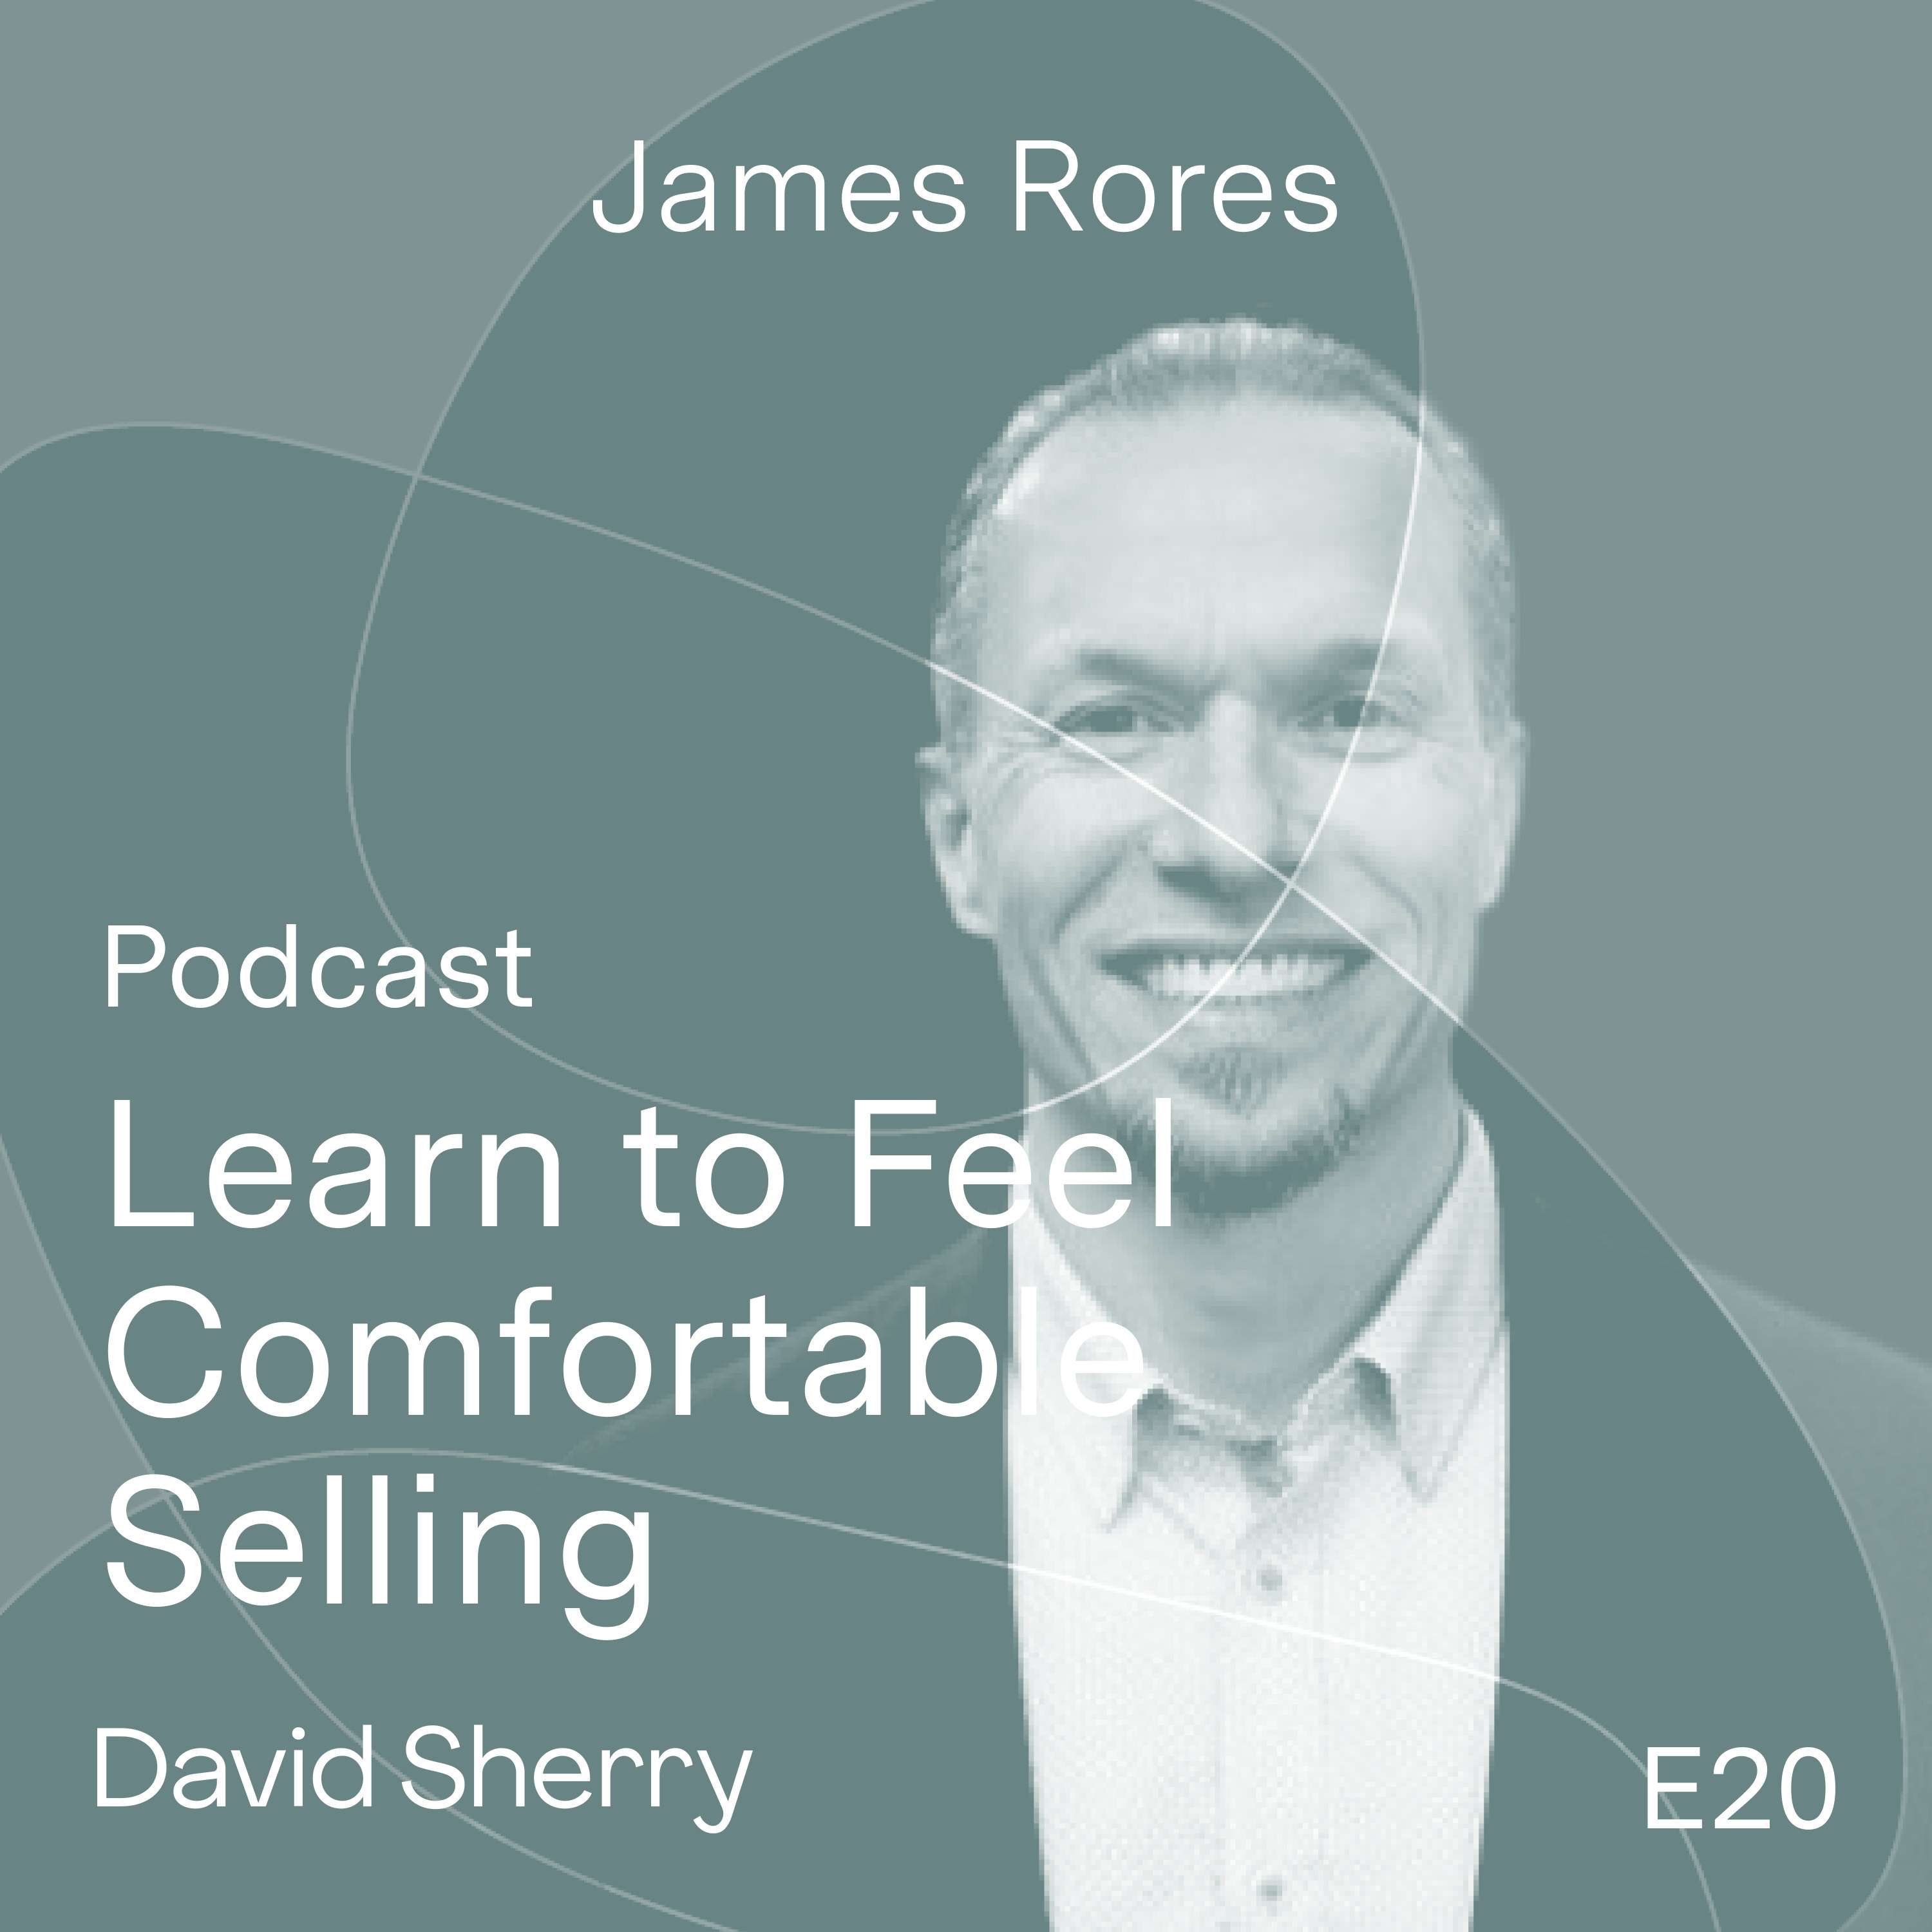 James Rores – Learn to Feel Comfortable Selling